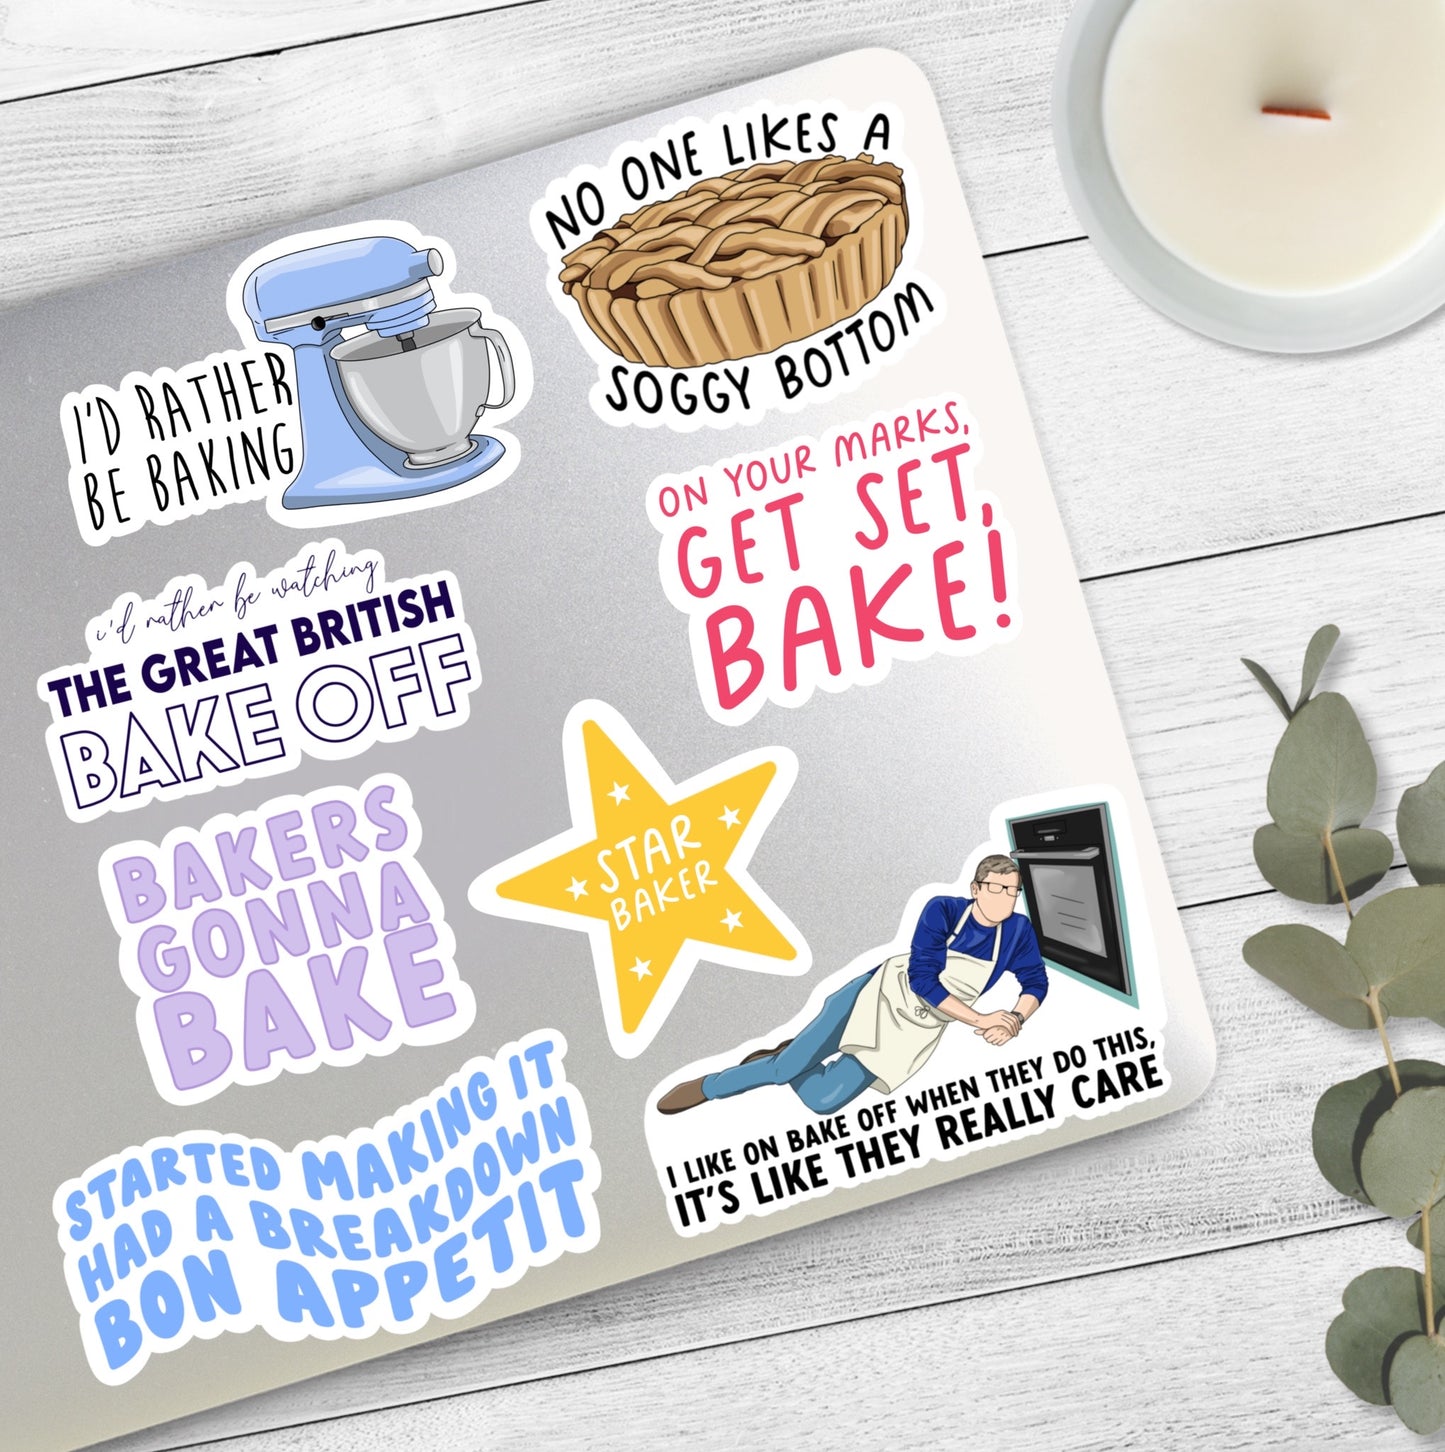 Started Making It, Had a Breakdown, Bon Appetit! James Acaster | Bake Off Stickers